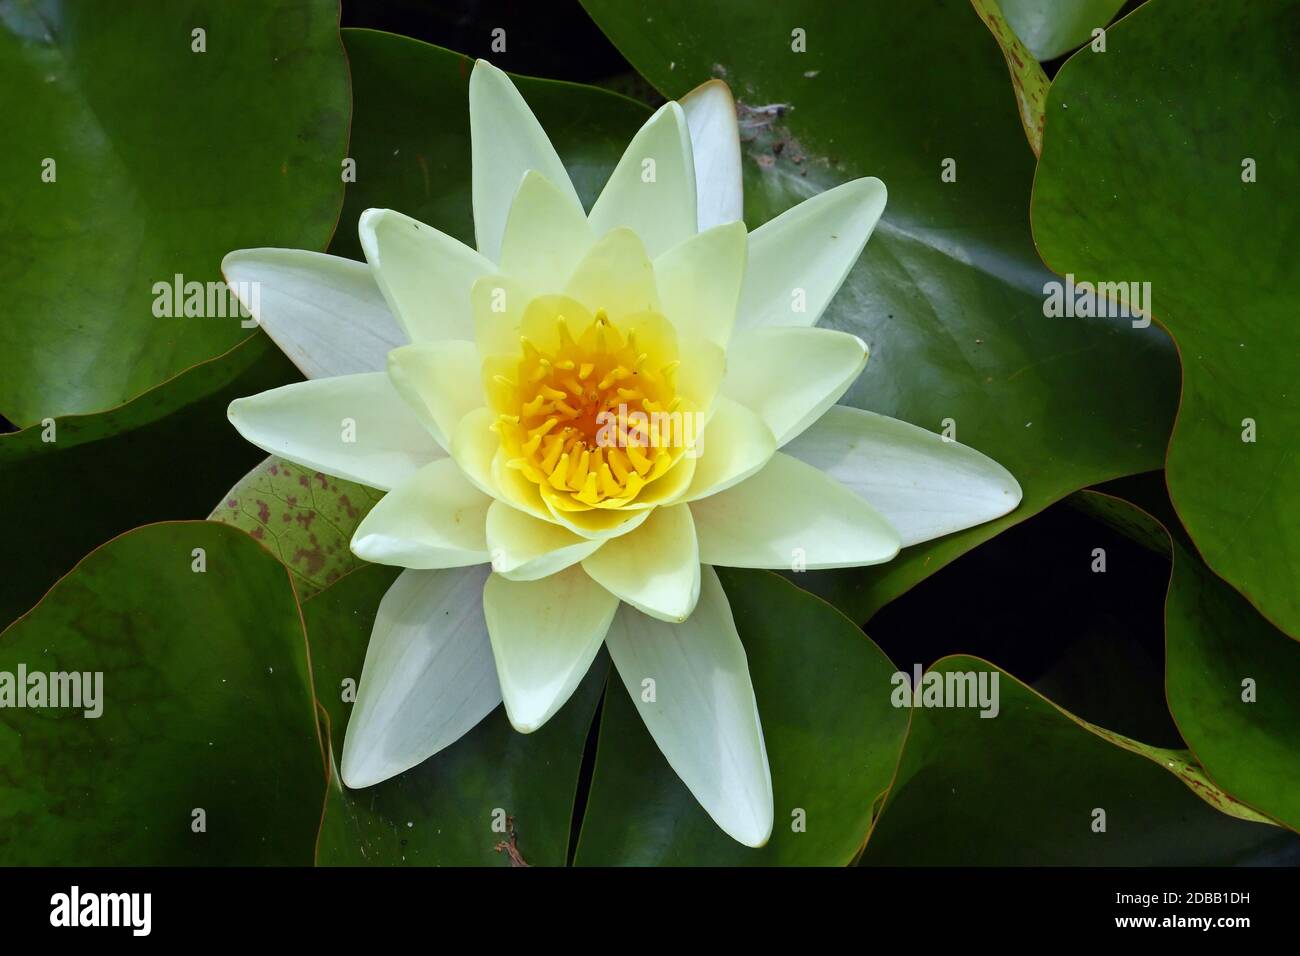 Flower of yellow water lily in a pond Stock Photo